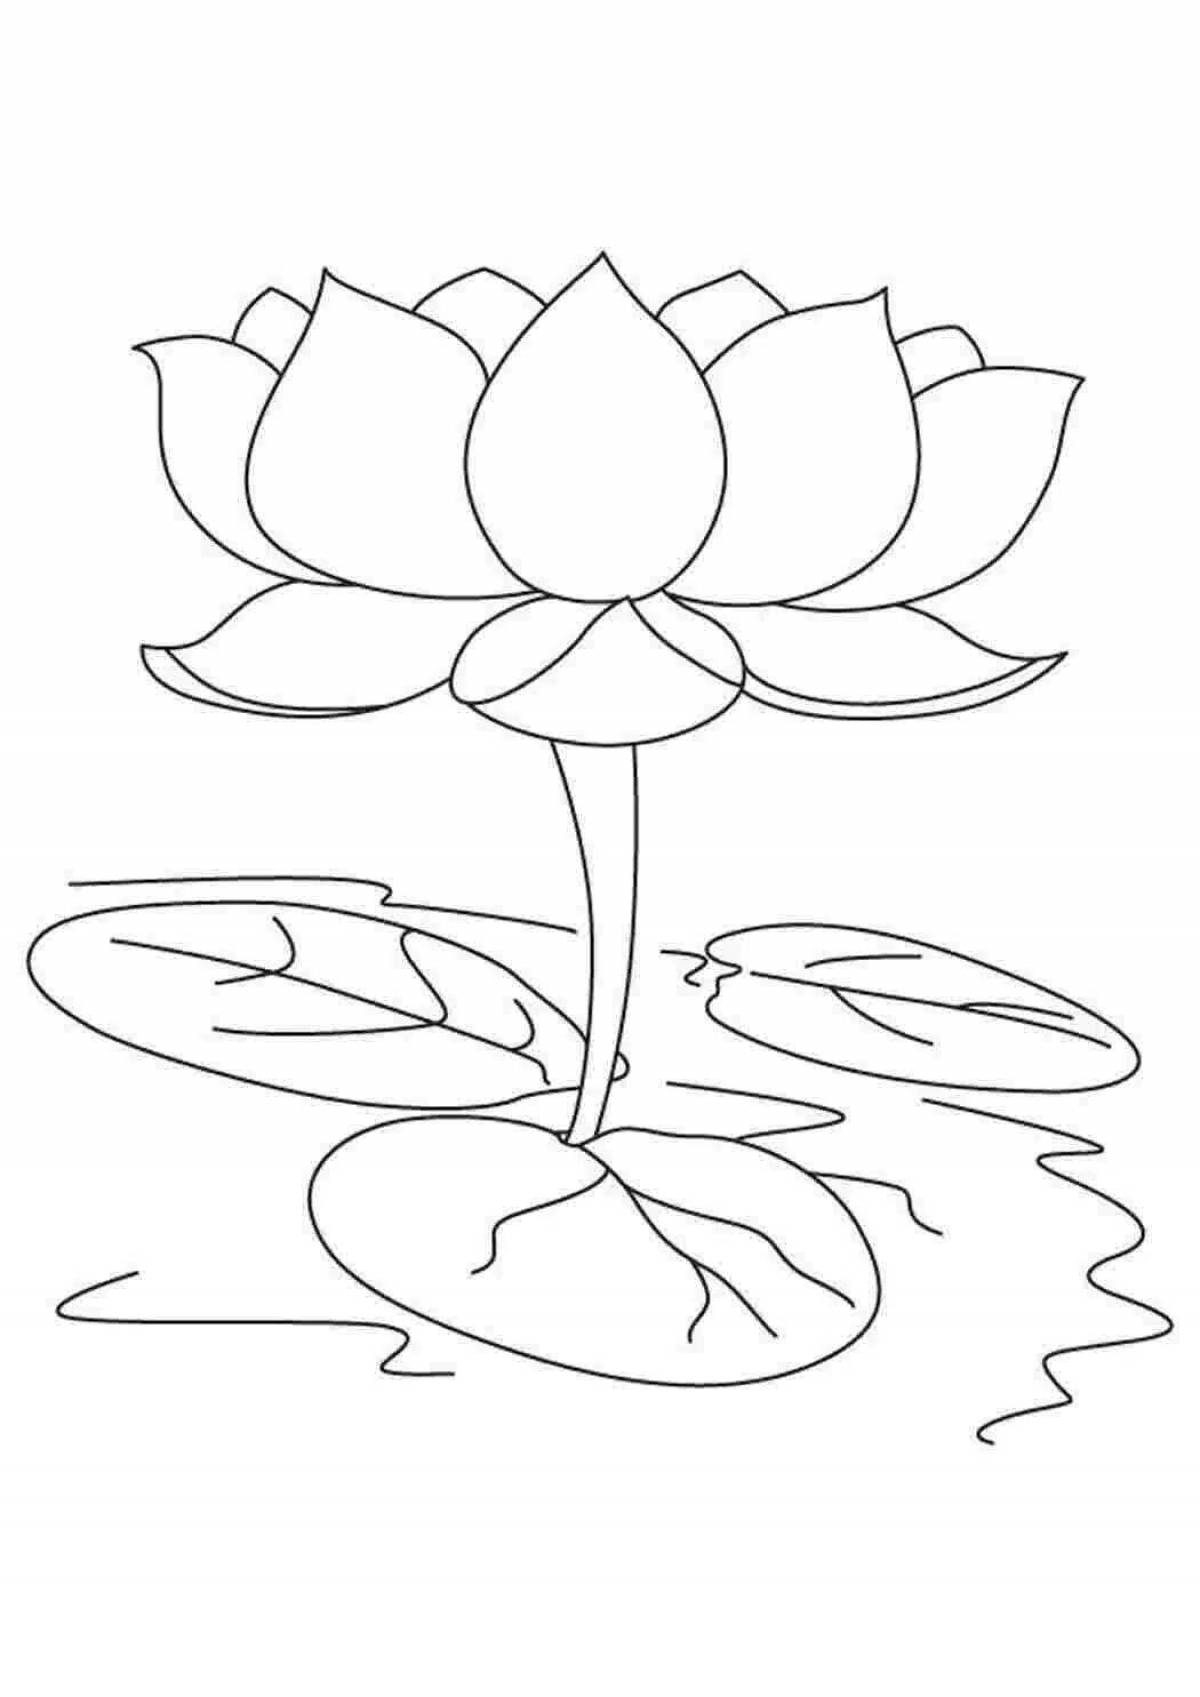 Exquisite white water lily coloring book